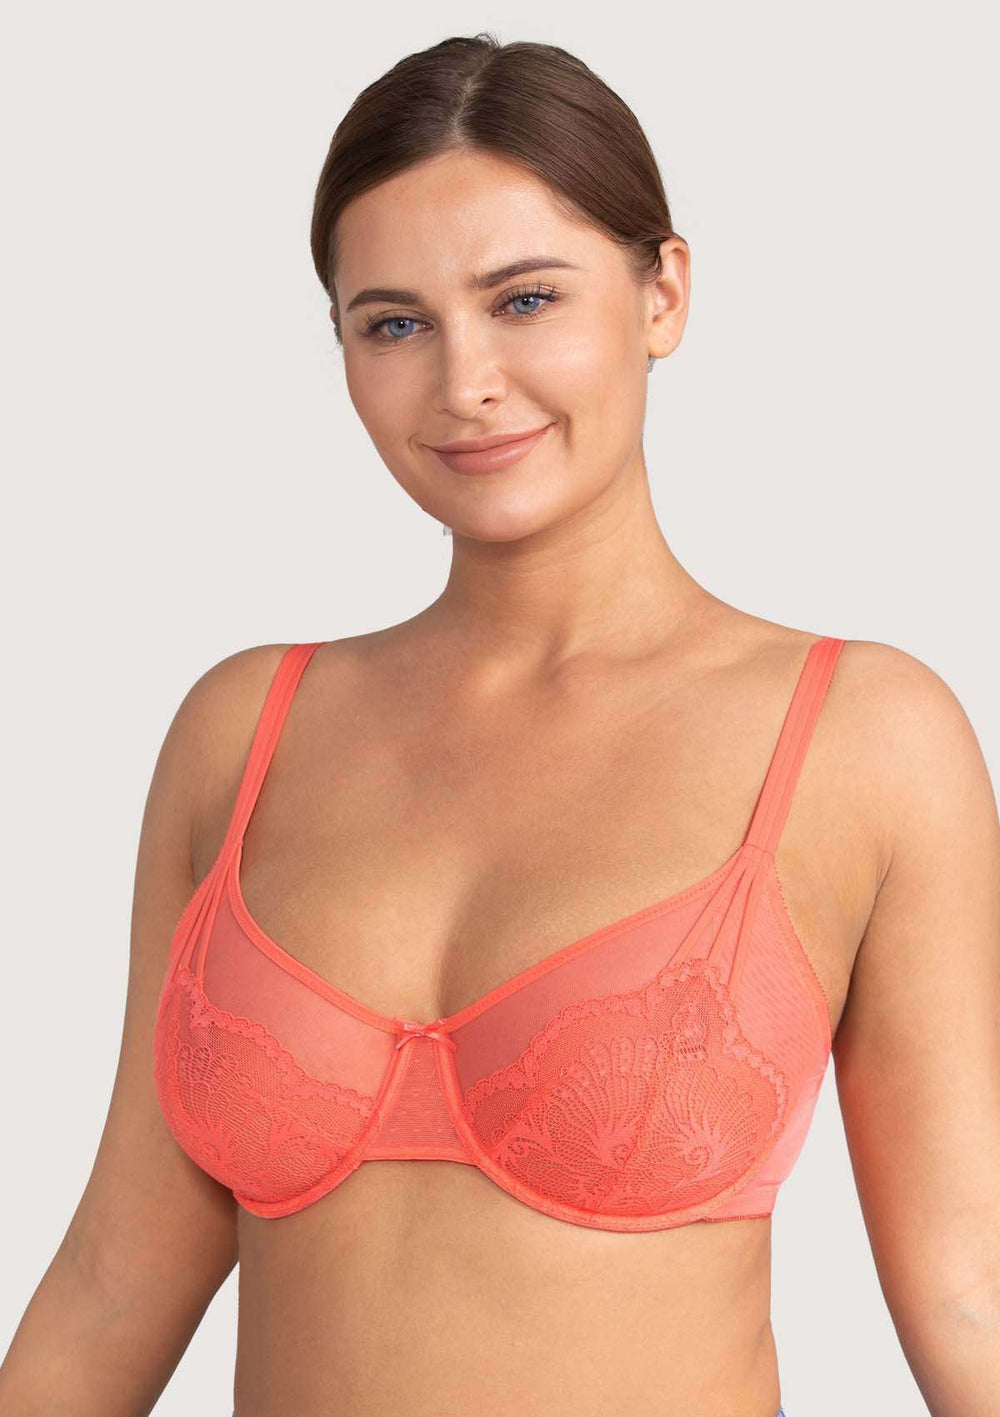 HSIA Minimizer Bra Underwire Unlined Full Bust Bra Non-Padded Sexy lace Bra,  12 Colors